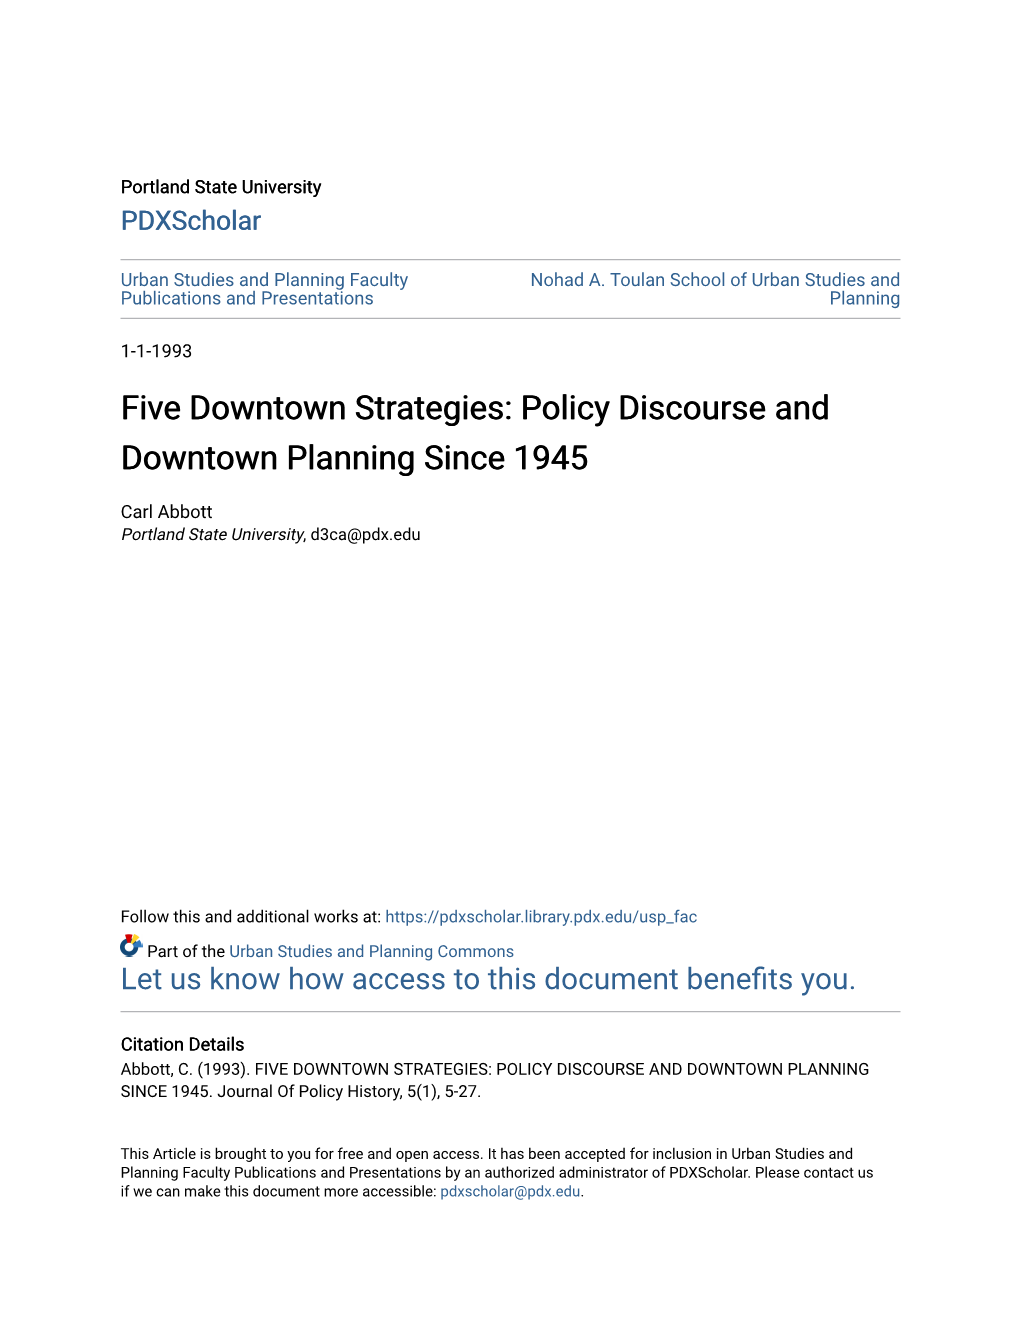 Five Downtown Strategies: Policy Discourse and Downtown Planning Since 1945